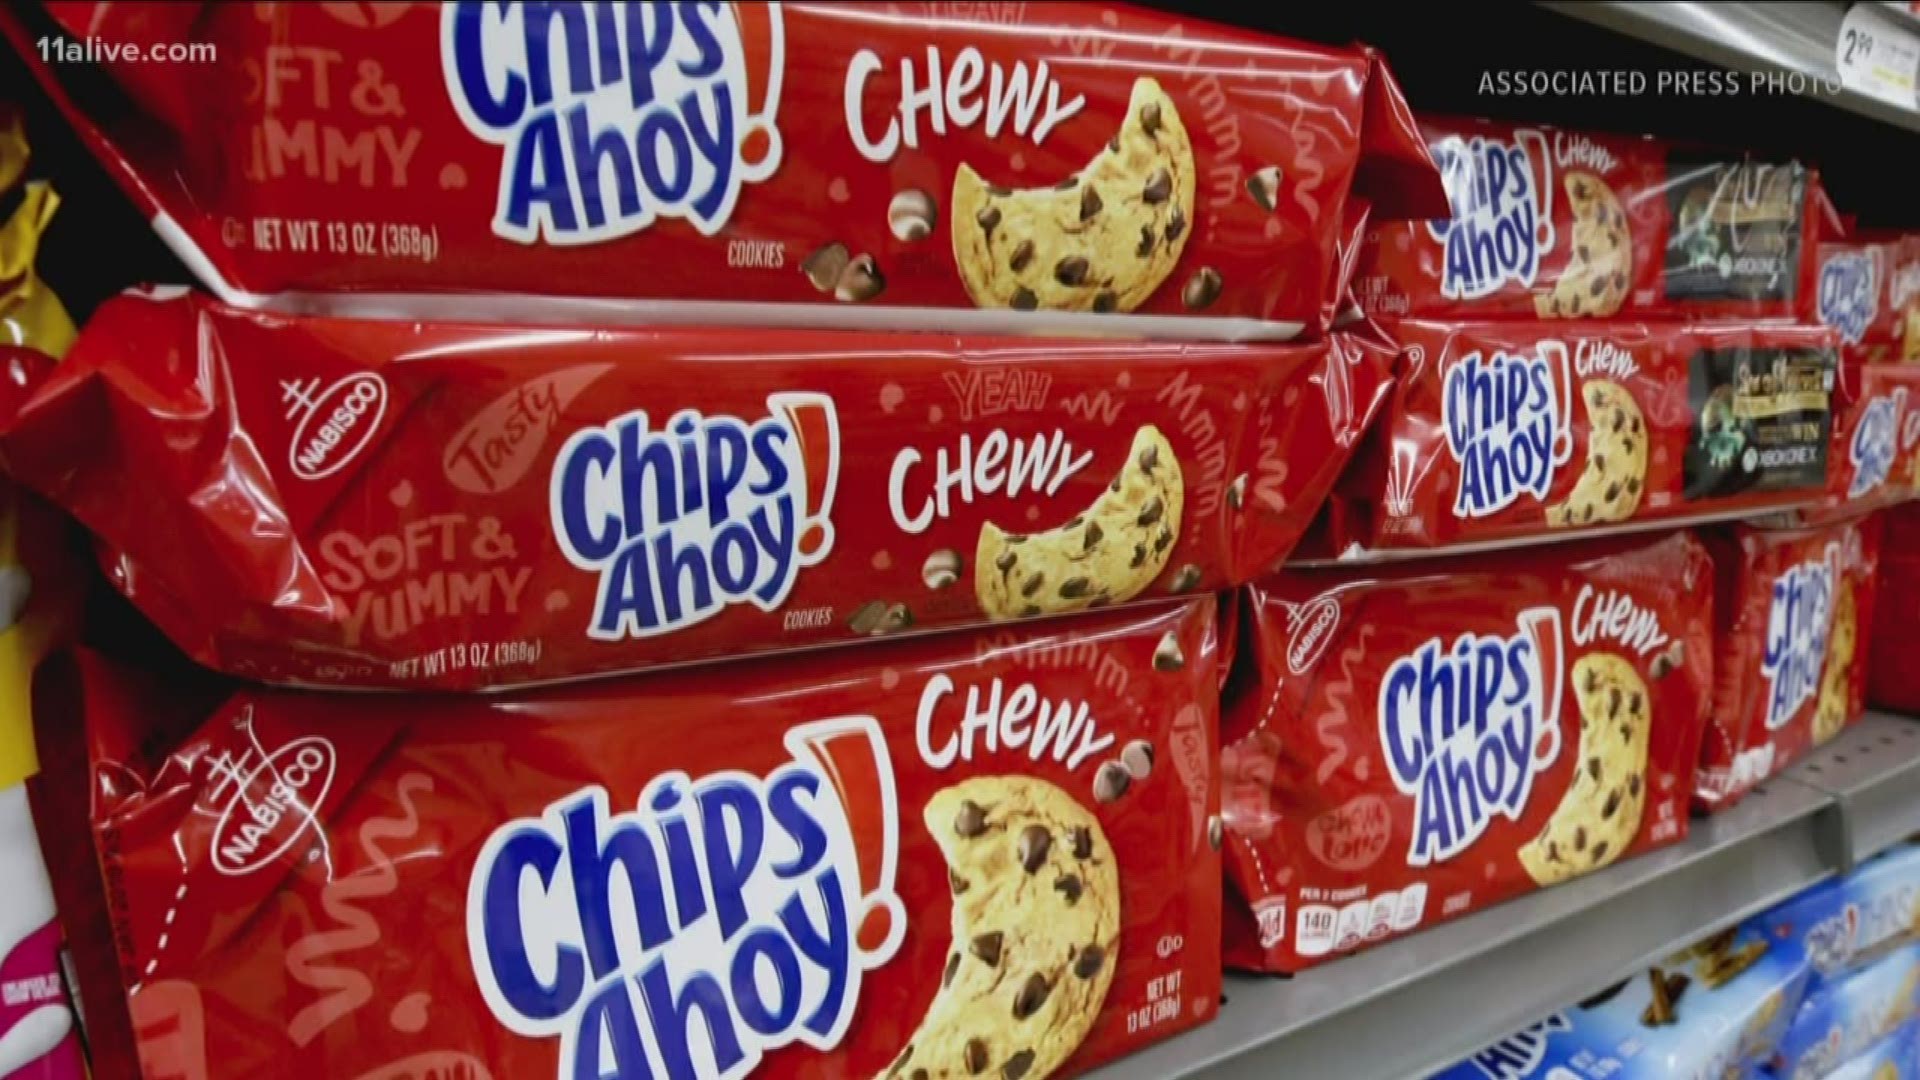 Mondelēz global is recalling some Chips Ahoy! chewy cookies due to the presence of an 'unexpected solidified ingredient.'